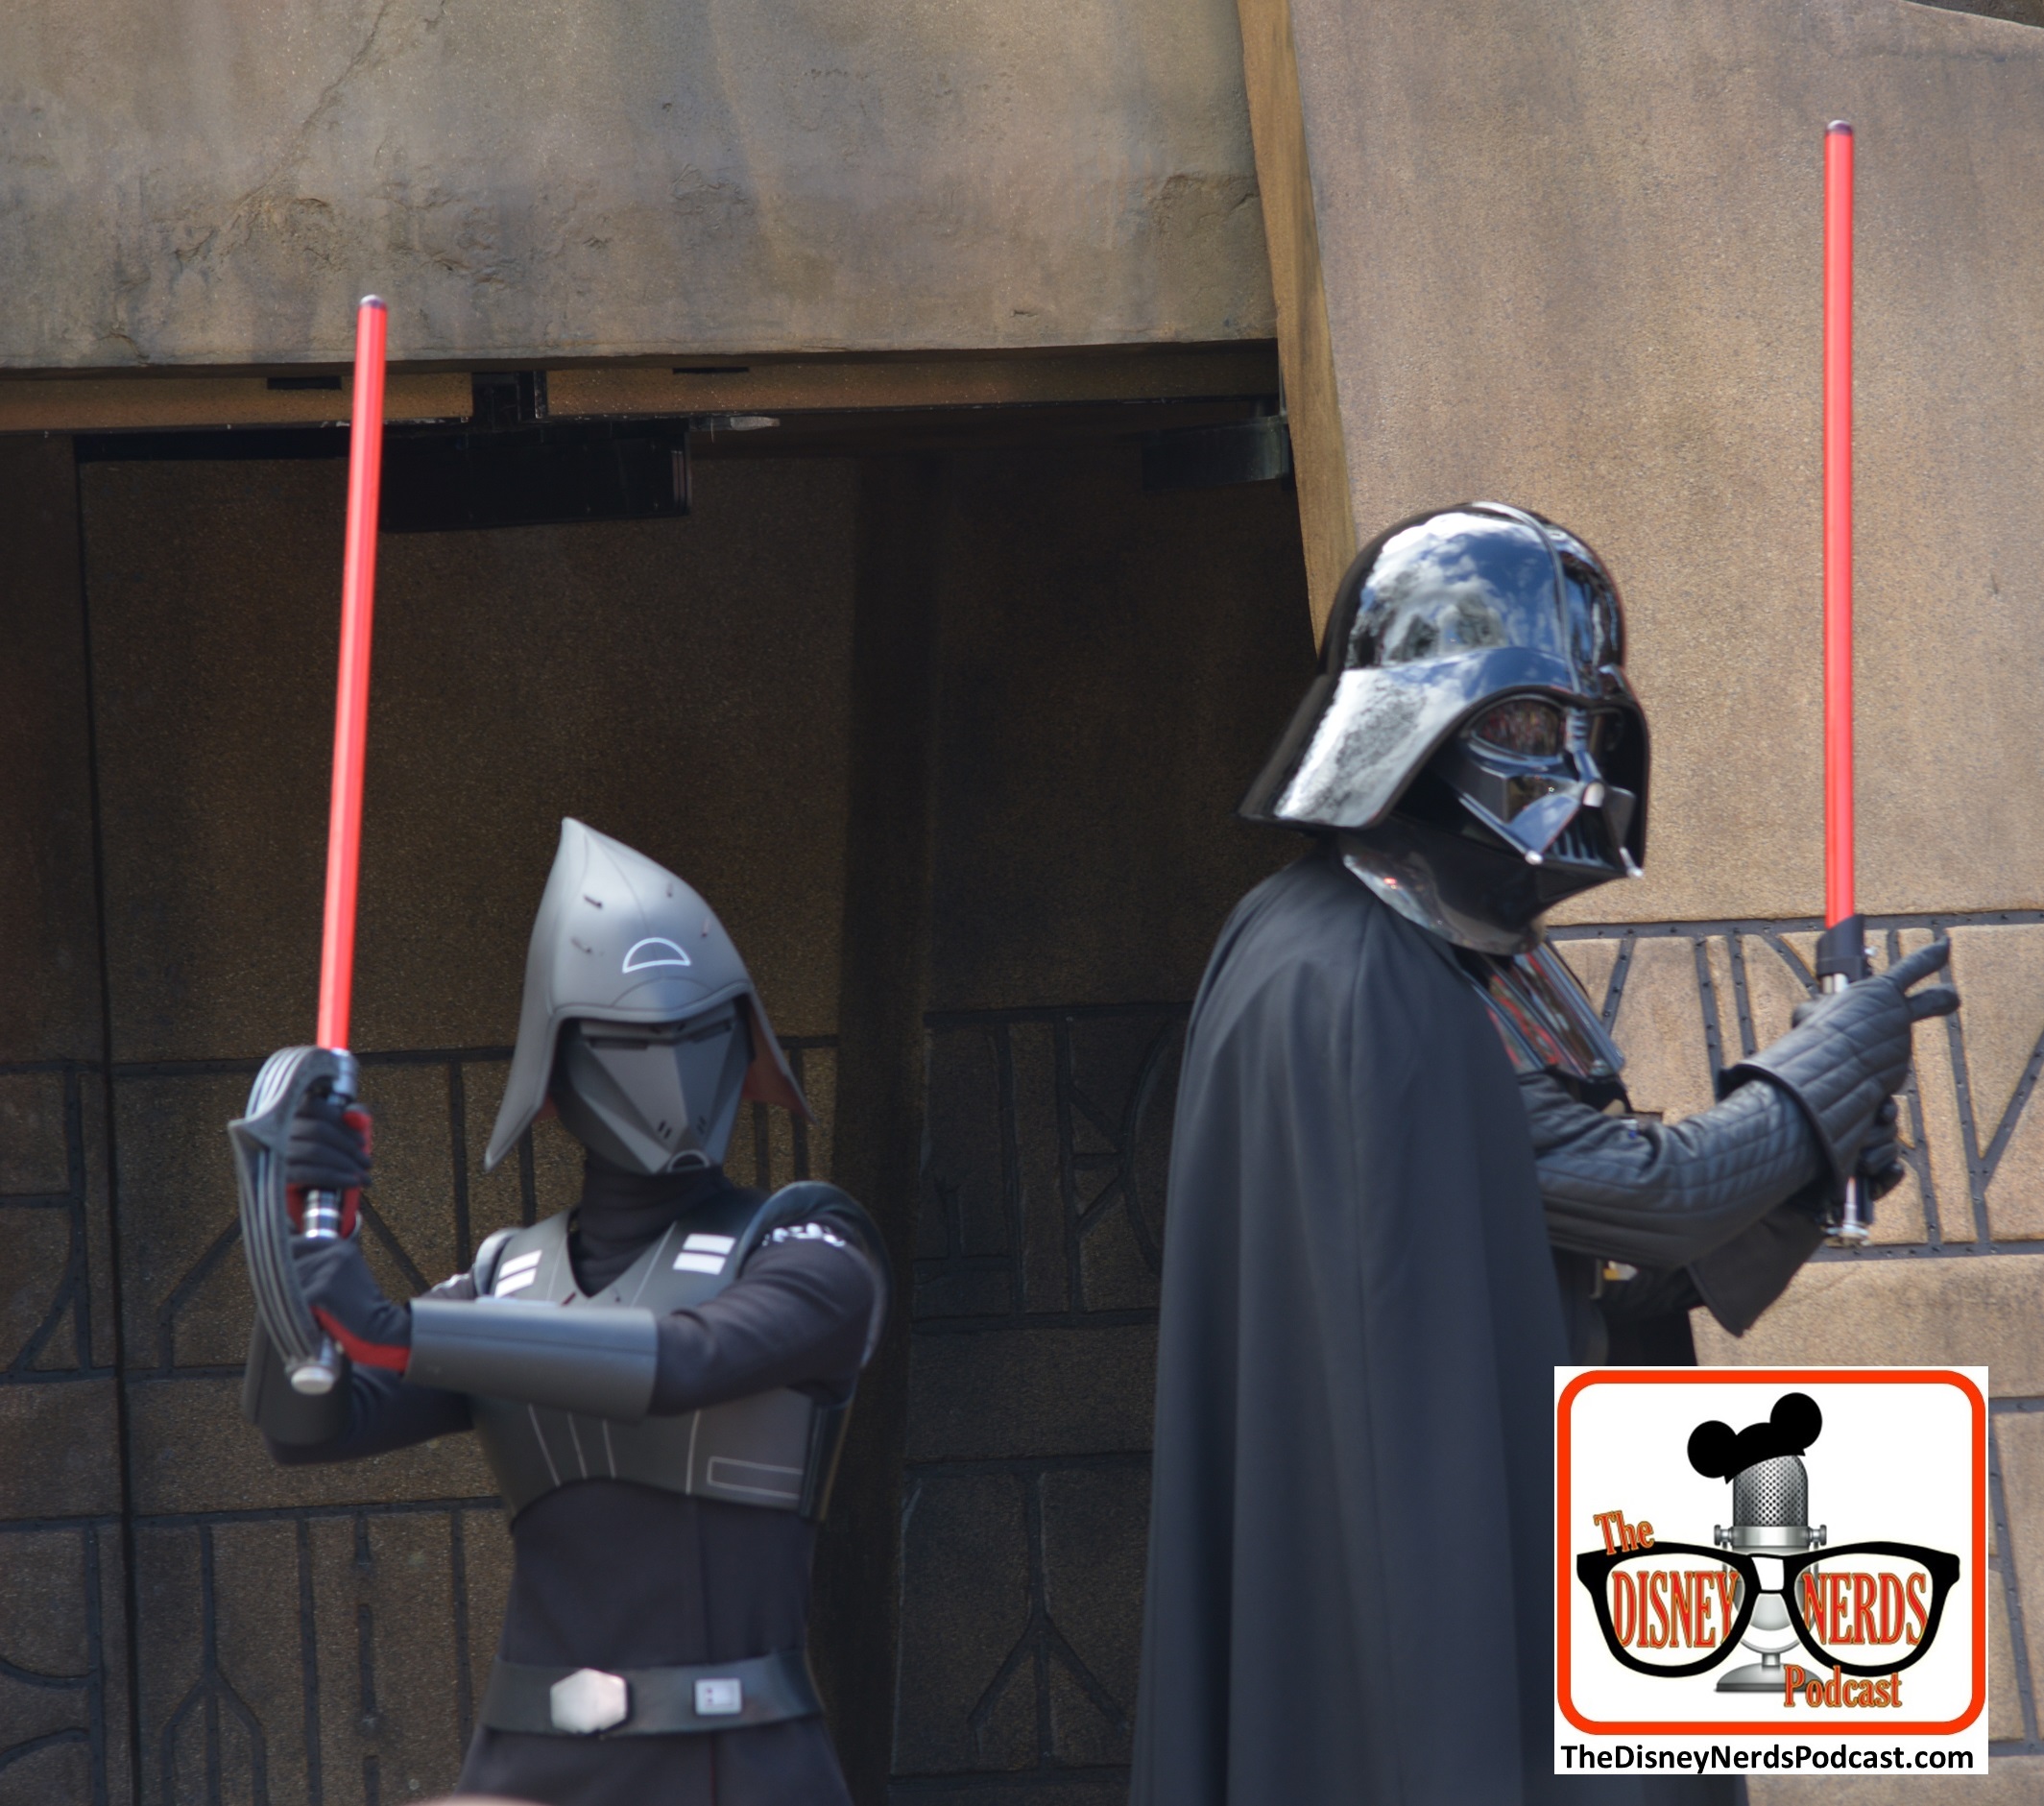 2015-12 - Hollywood Studios - New Jedi Training Stage and Show features a new villain (The Seventh Sister) along with Darth Vader